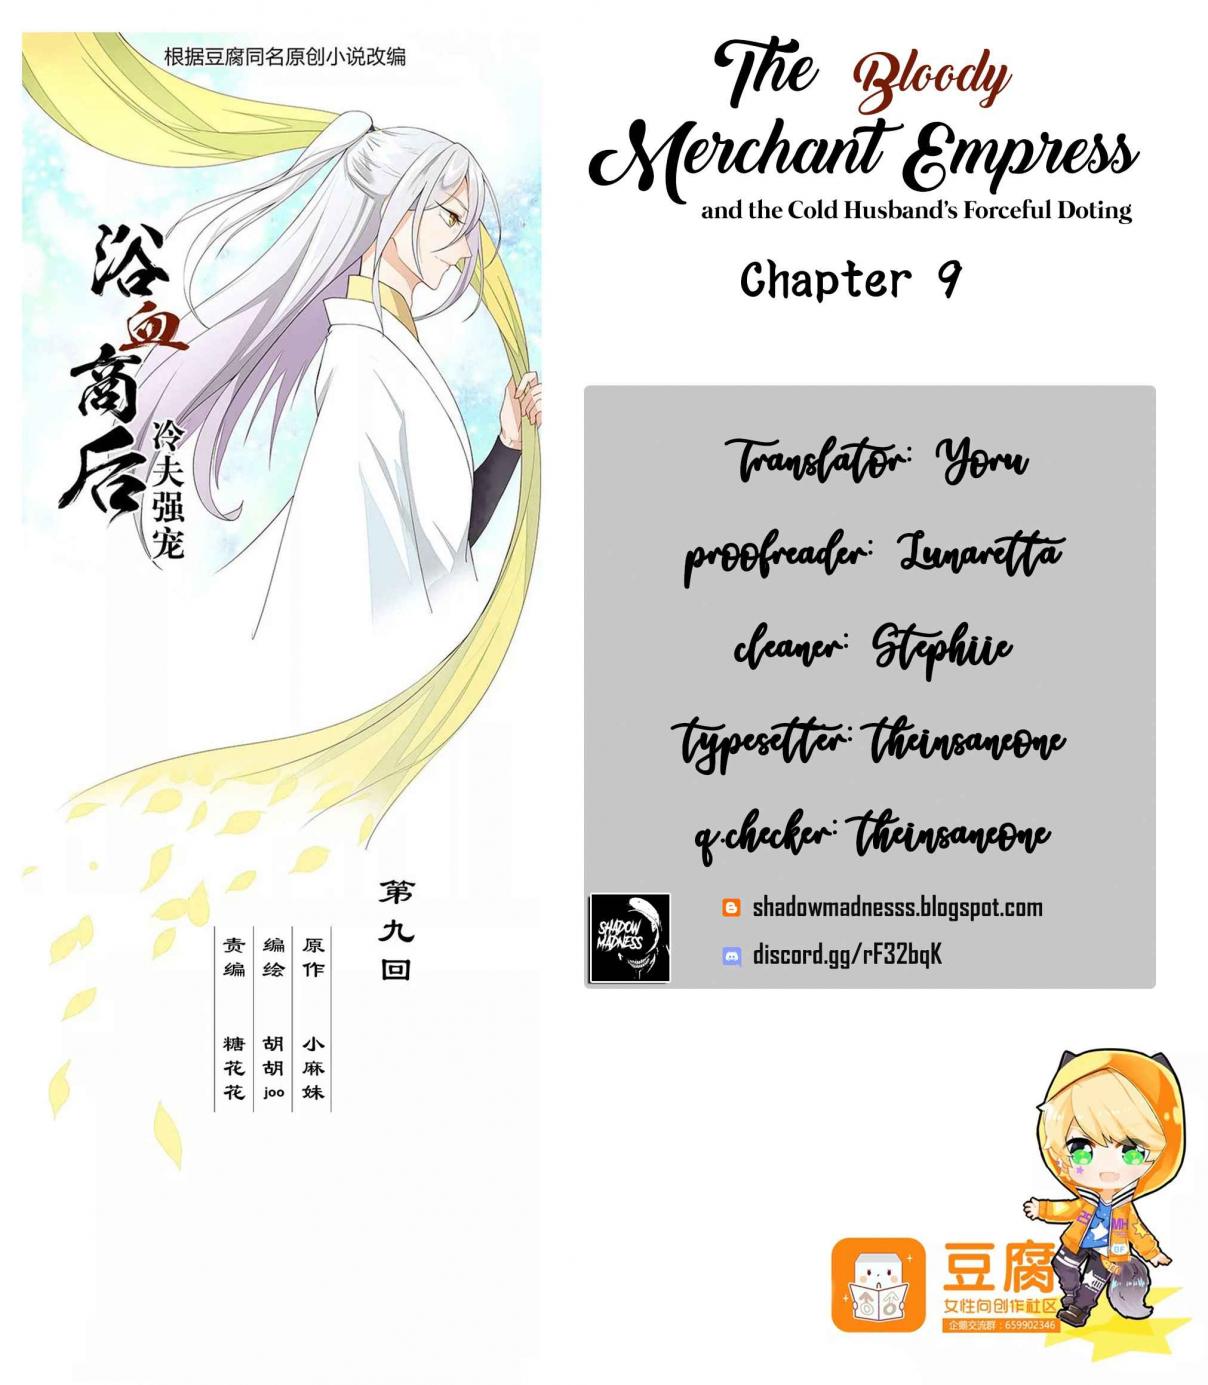 The Bloody Merchant Empress and the Cold Husband's Forceful Doting Ch. 9